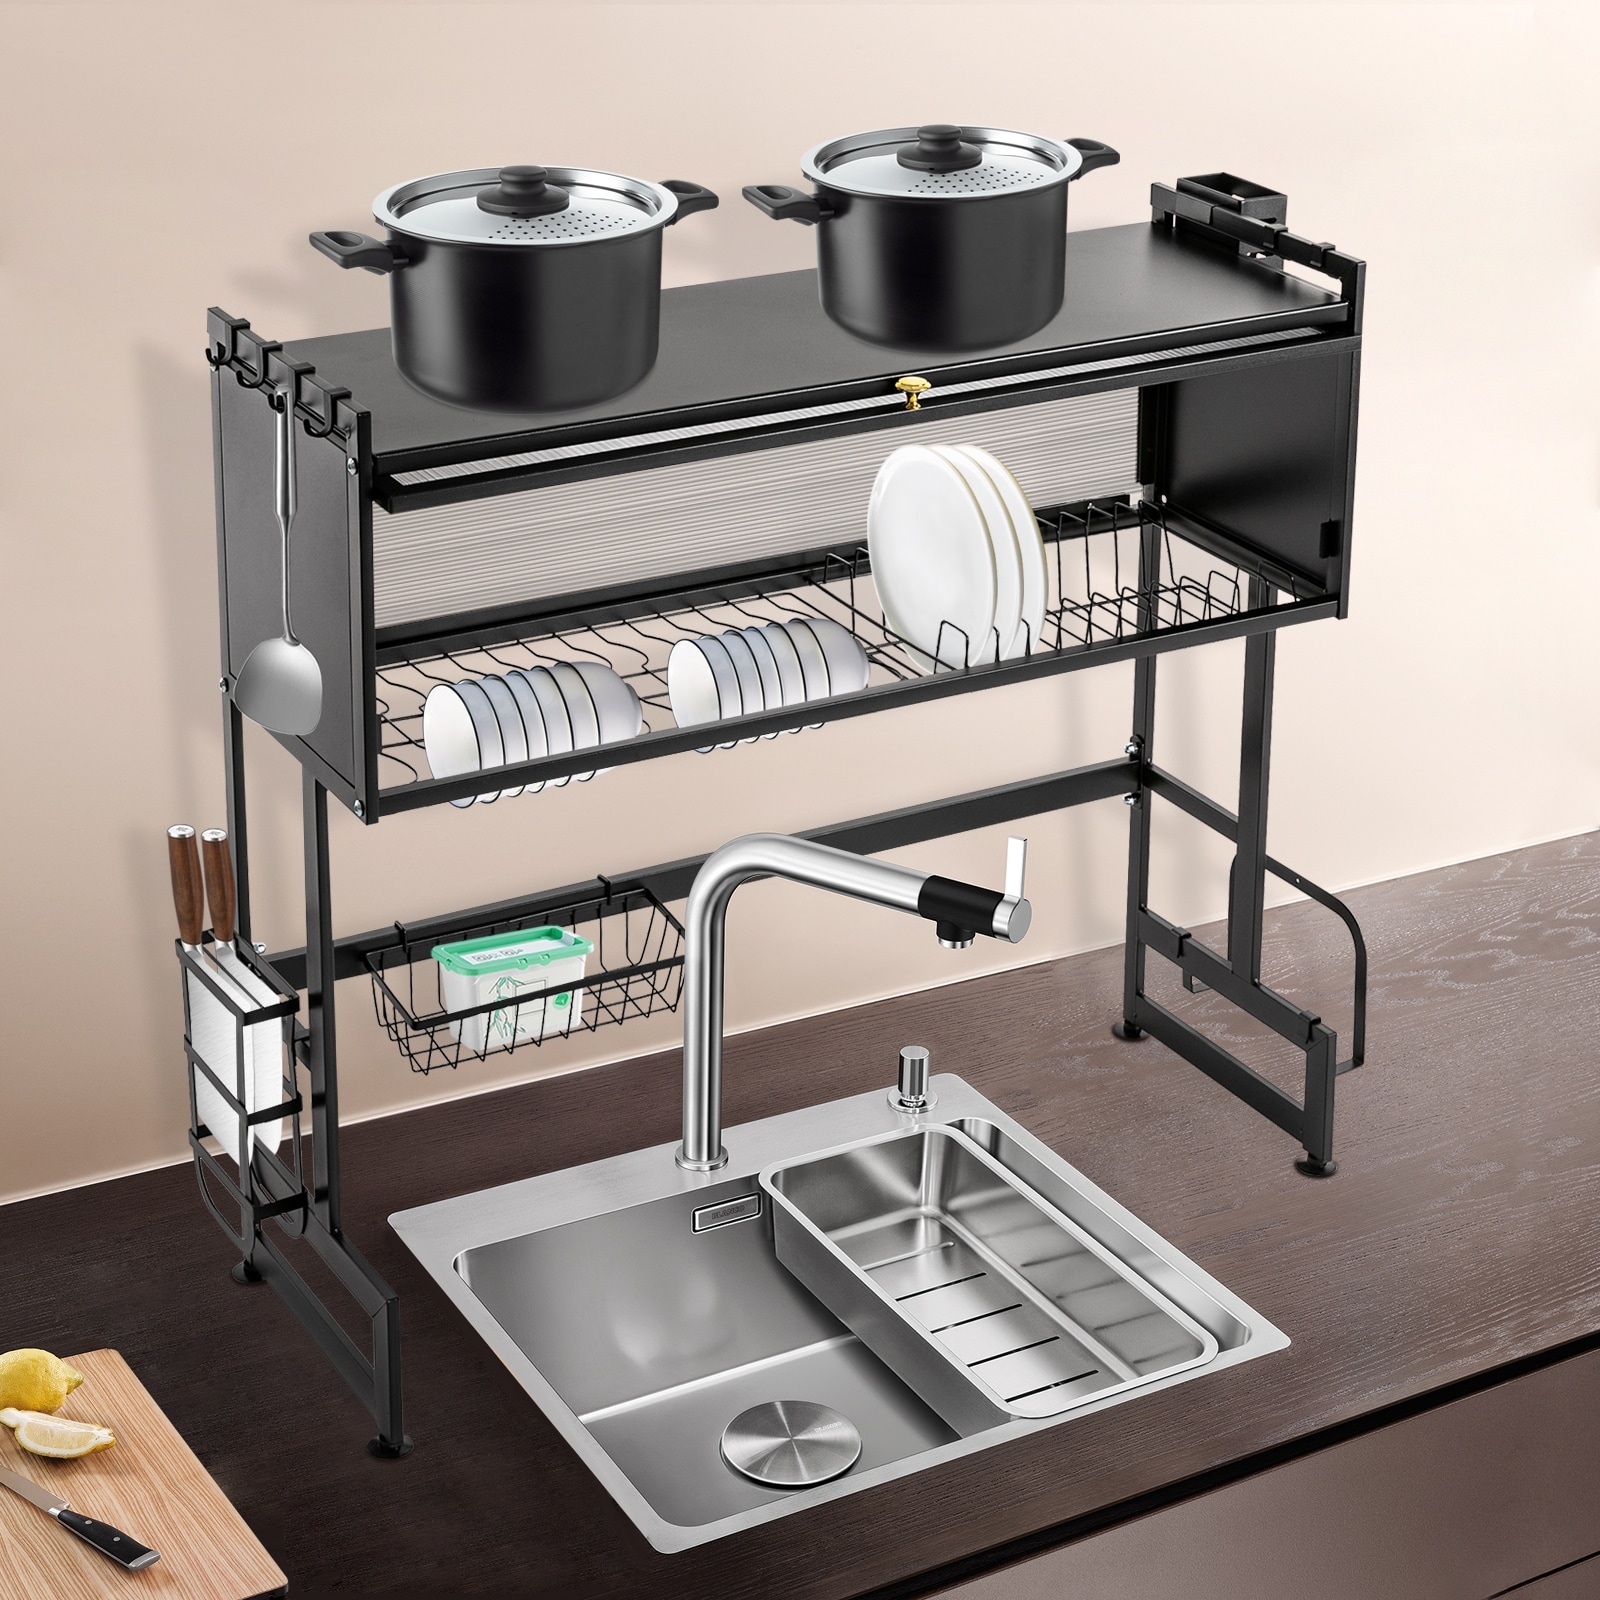 https://ak1.ostkcdn.com/images/products/is/images/direct/d6aa2bcdf6e53a9bcd7aae519527900a82133ee0/2-tier-Dish-Drainer-Cutlery-Drainer-Dish-Drying-Rack.jpg